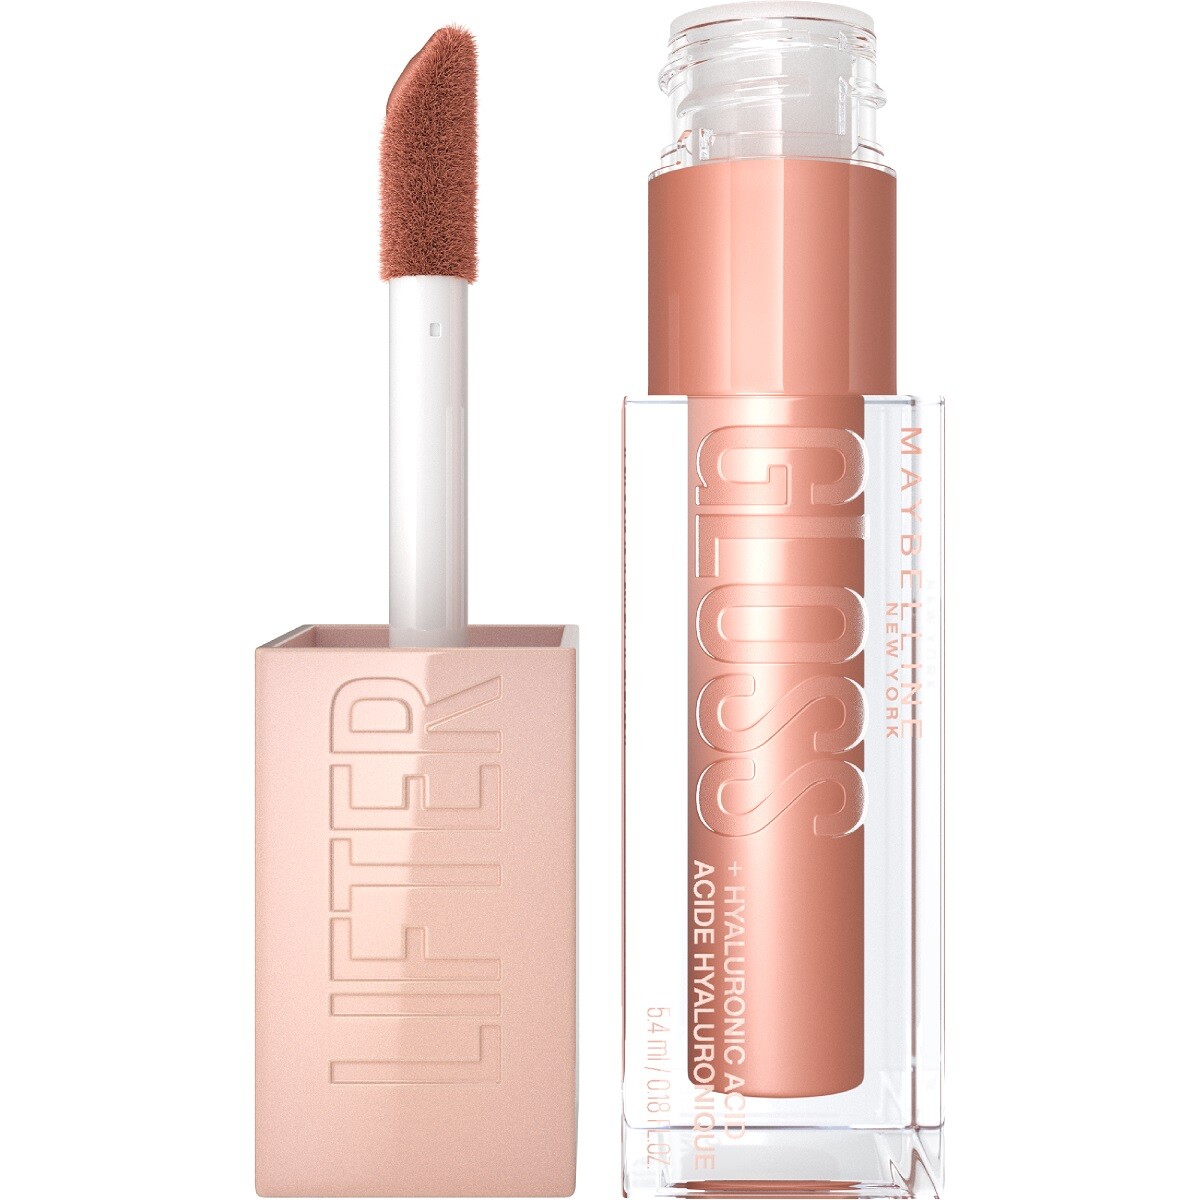 Labial Maybelline Lifter Gloss - Stone 